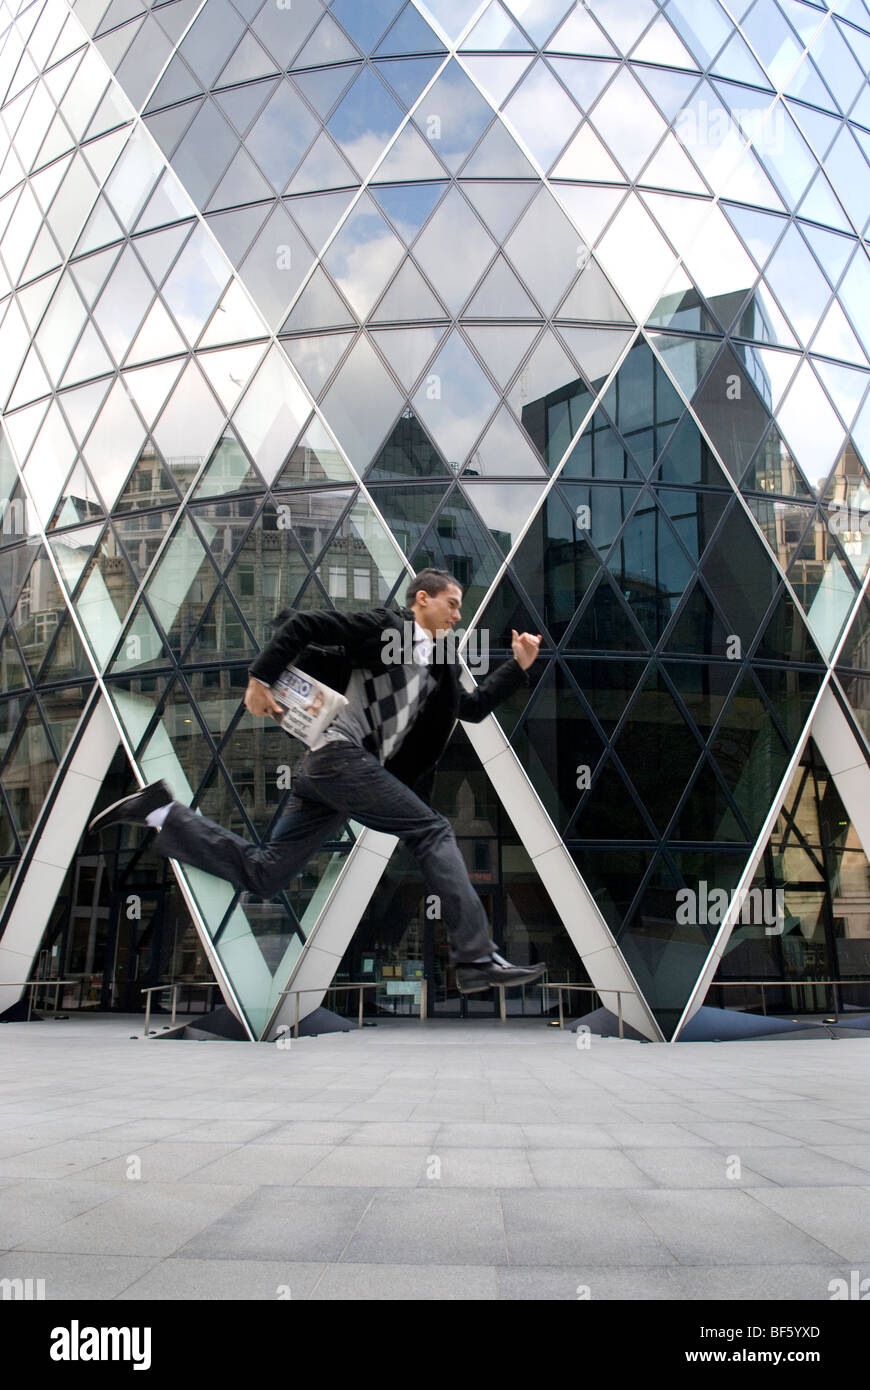 A suited young man is leaping in front of The Gherkin, St Mary's Axe, London, holding a newspaper in his hand Stock Photo